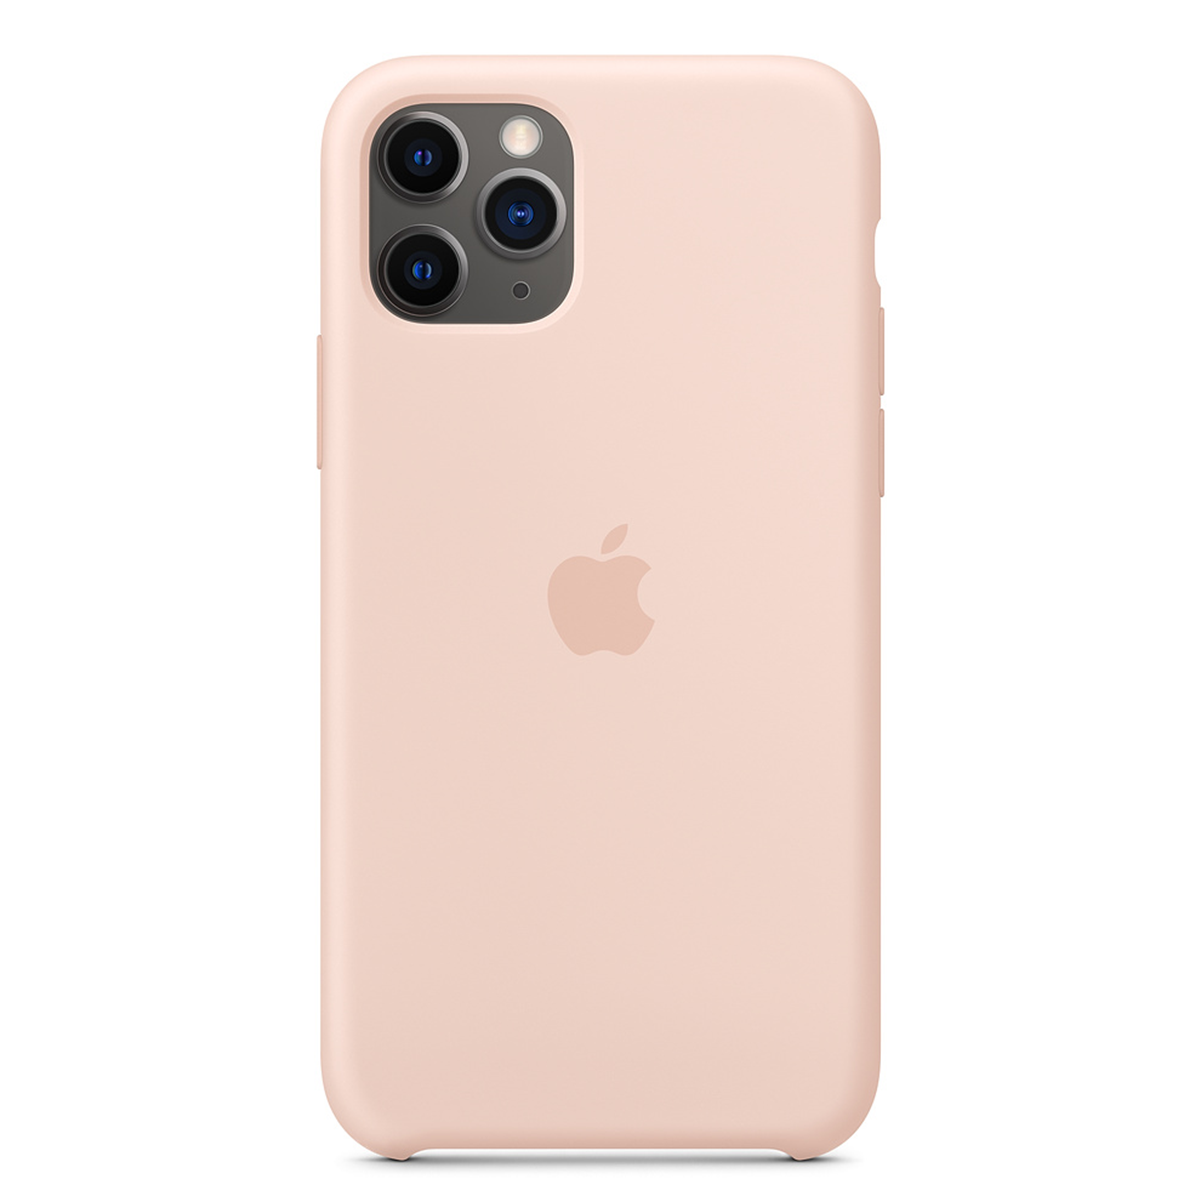 iPhone 11 Pro Silicone Case Pink Sand